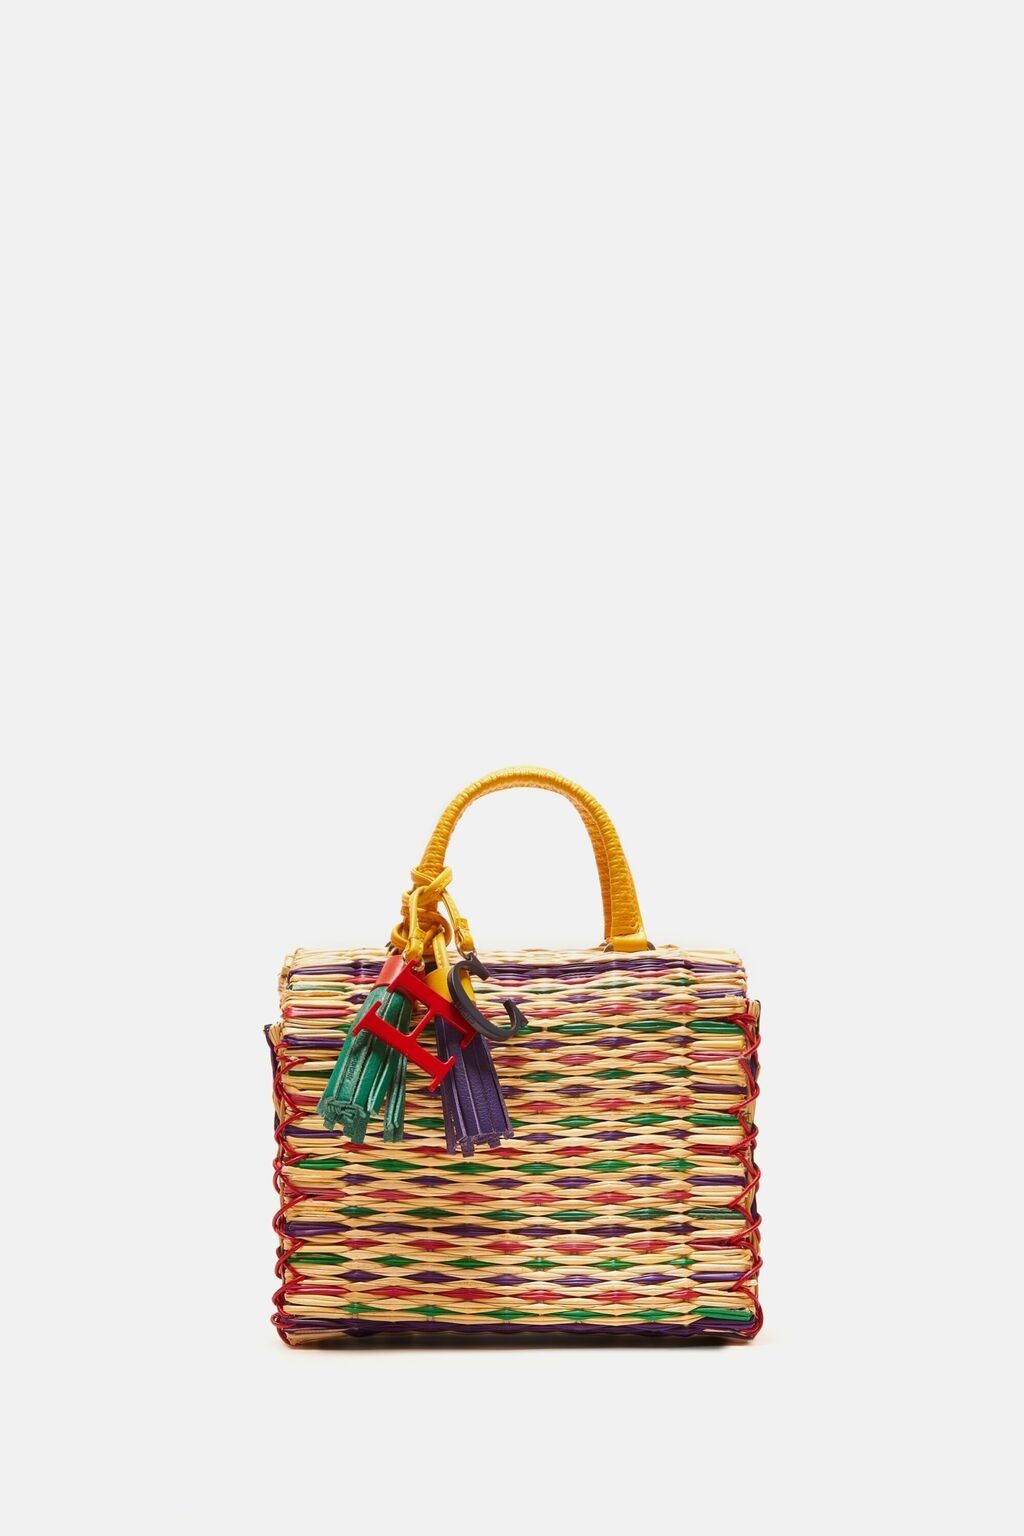 The 23 Best Straw Bags to Carry 2023 — Natural Raffia and Wicker Totes